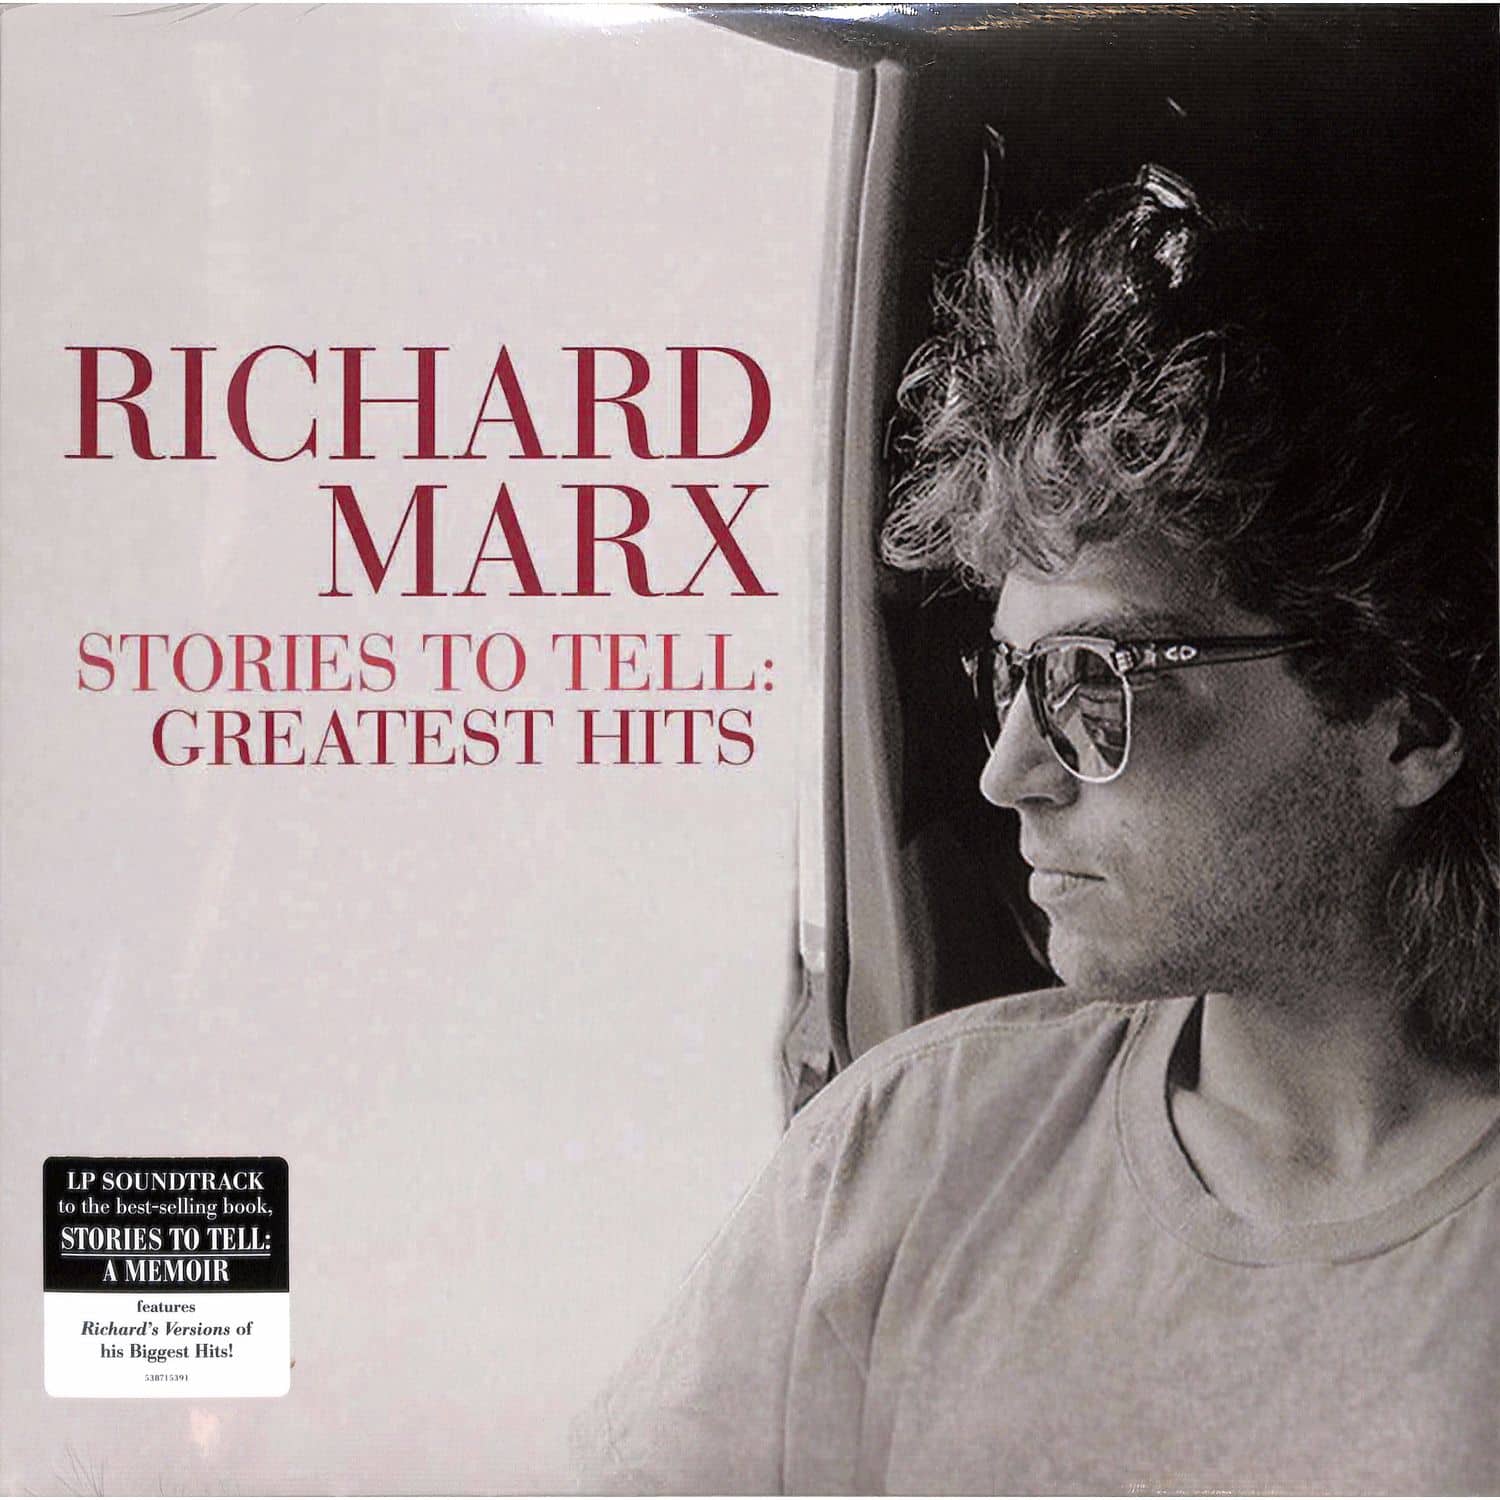 Richard Marx - STORIES TO TELL: GREATEST HITS 